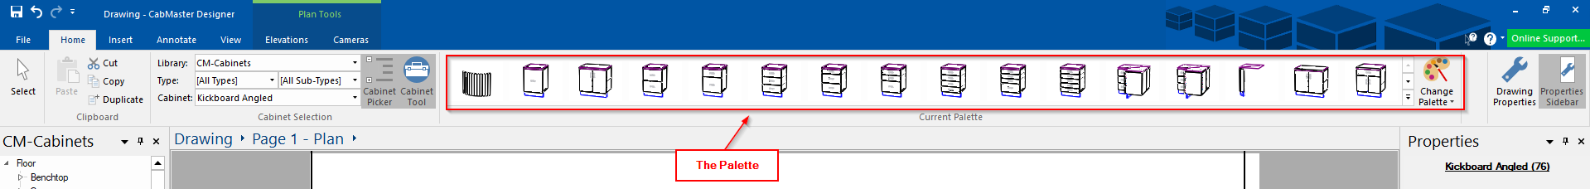 How To Customize the Palette and Images QIZ